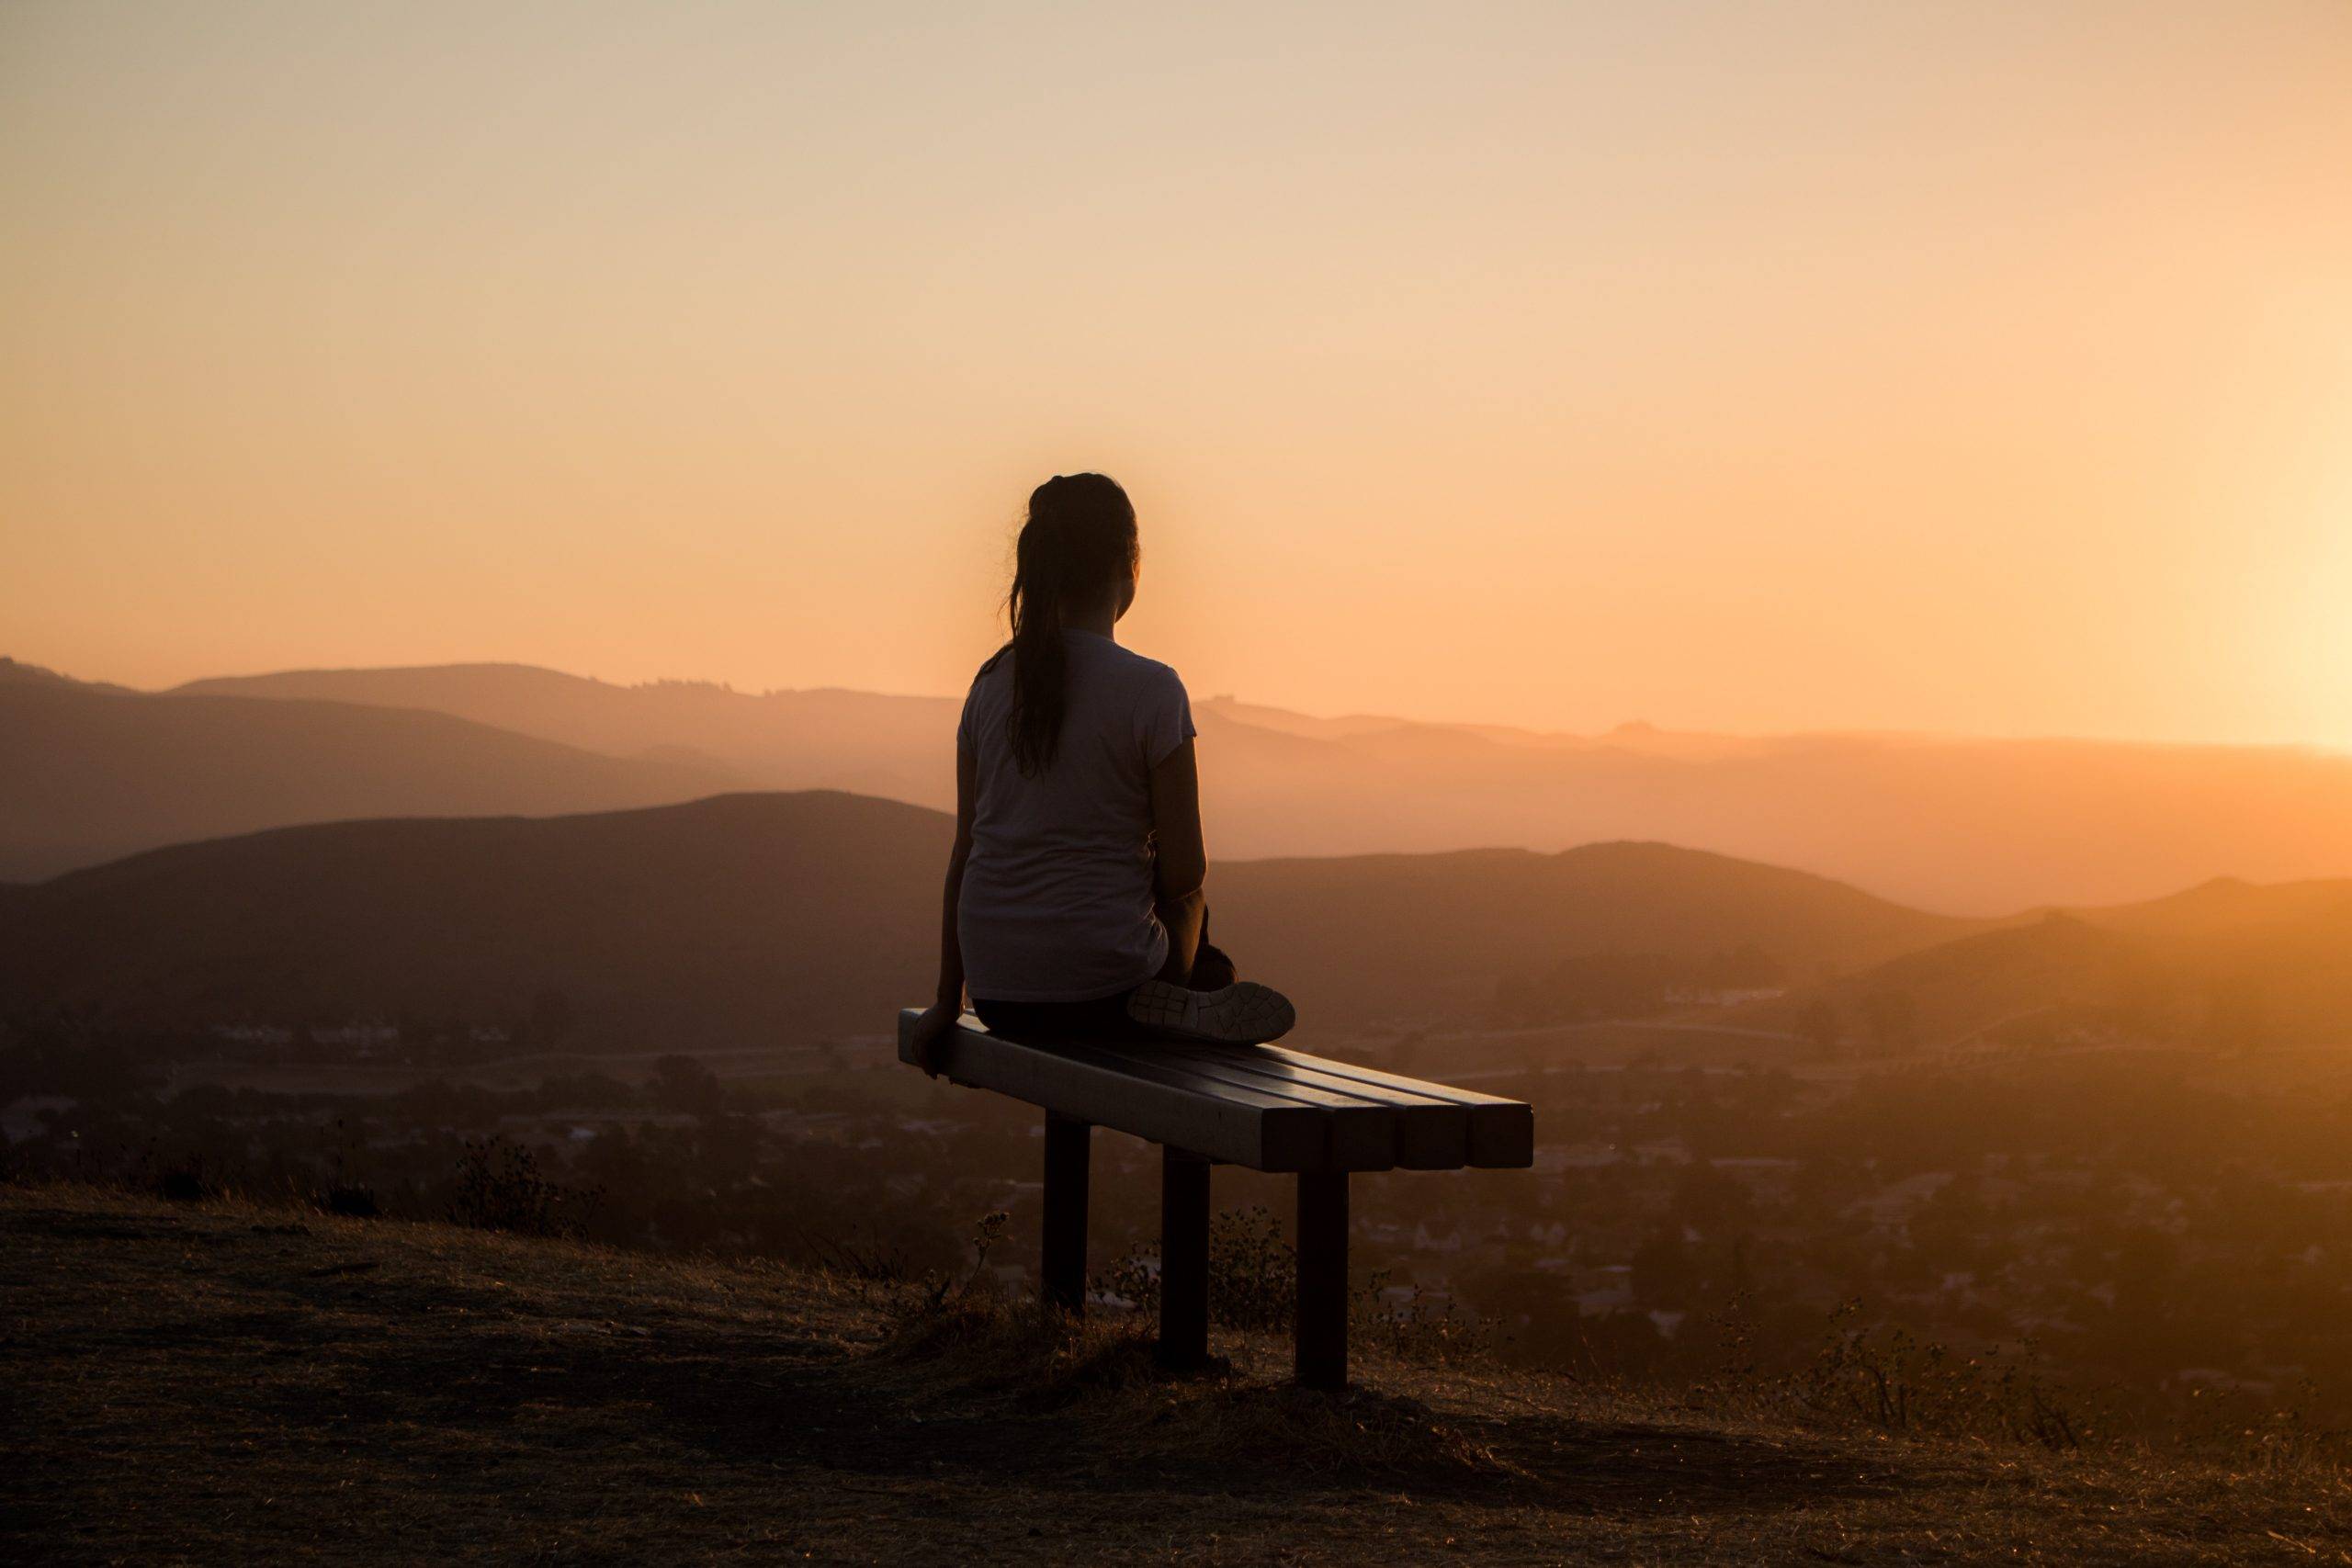  6 ways to empty your mind if you are stressed out - girl meditation in nature